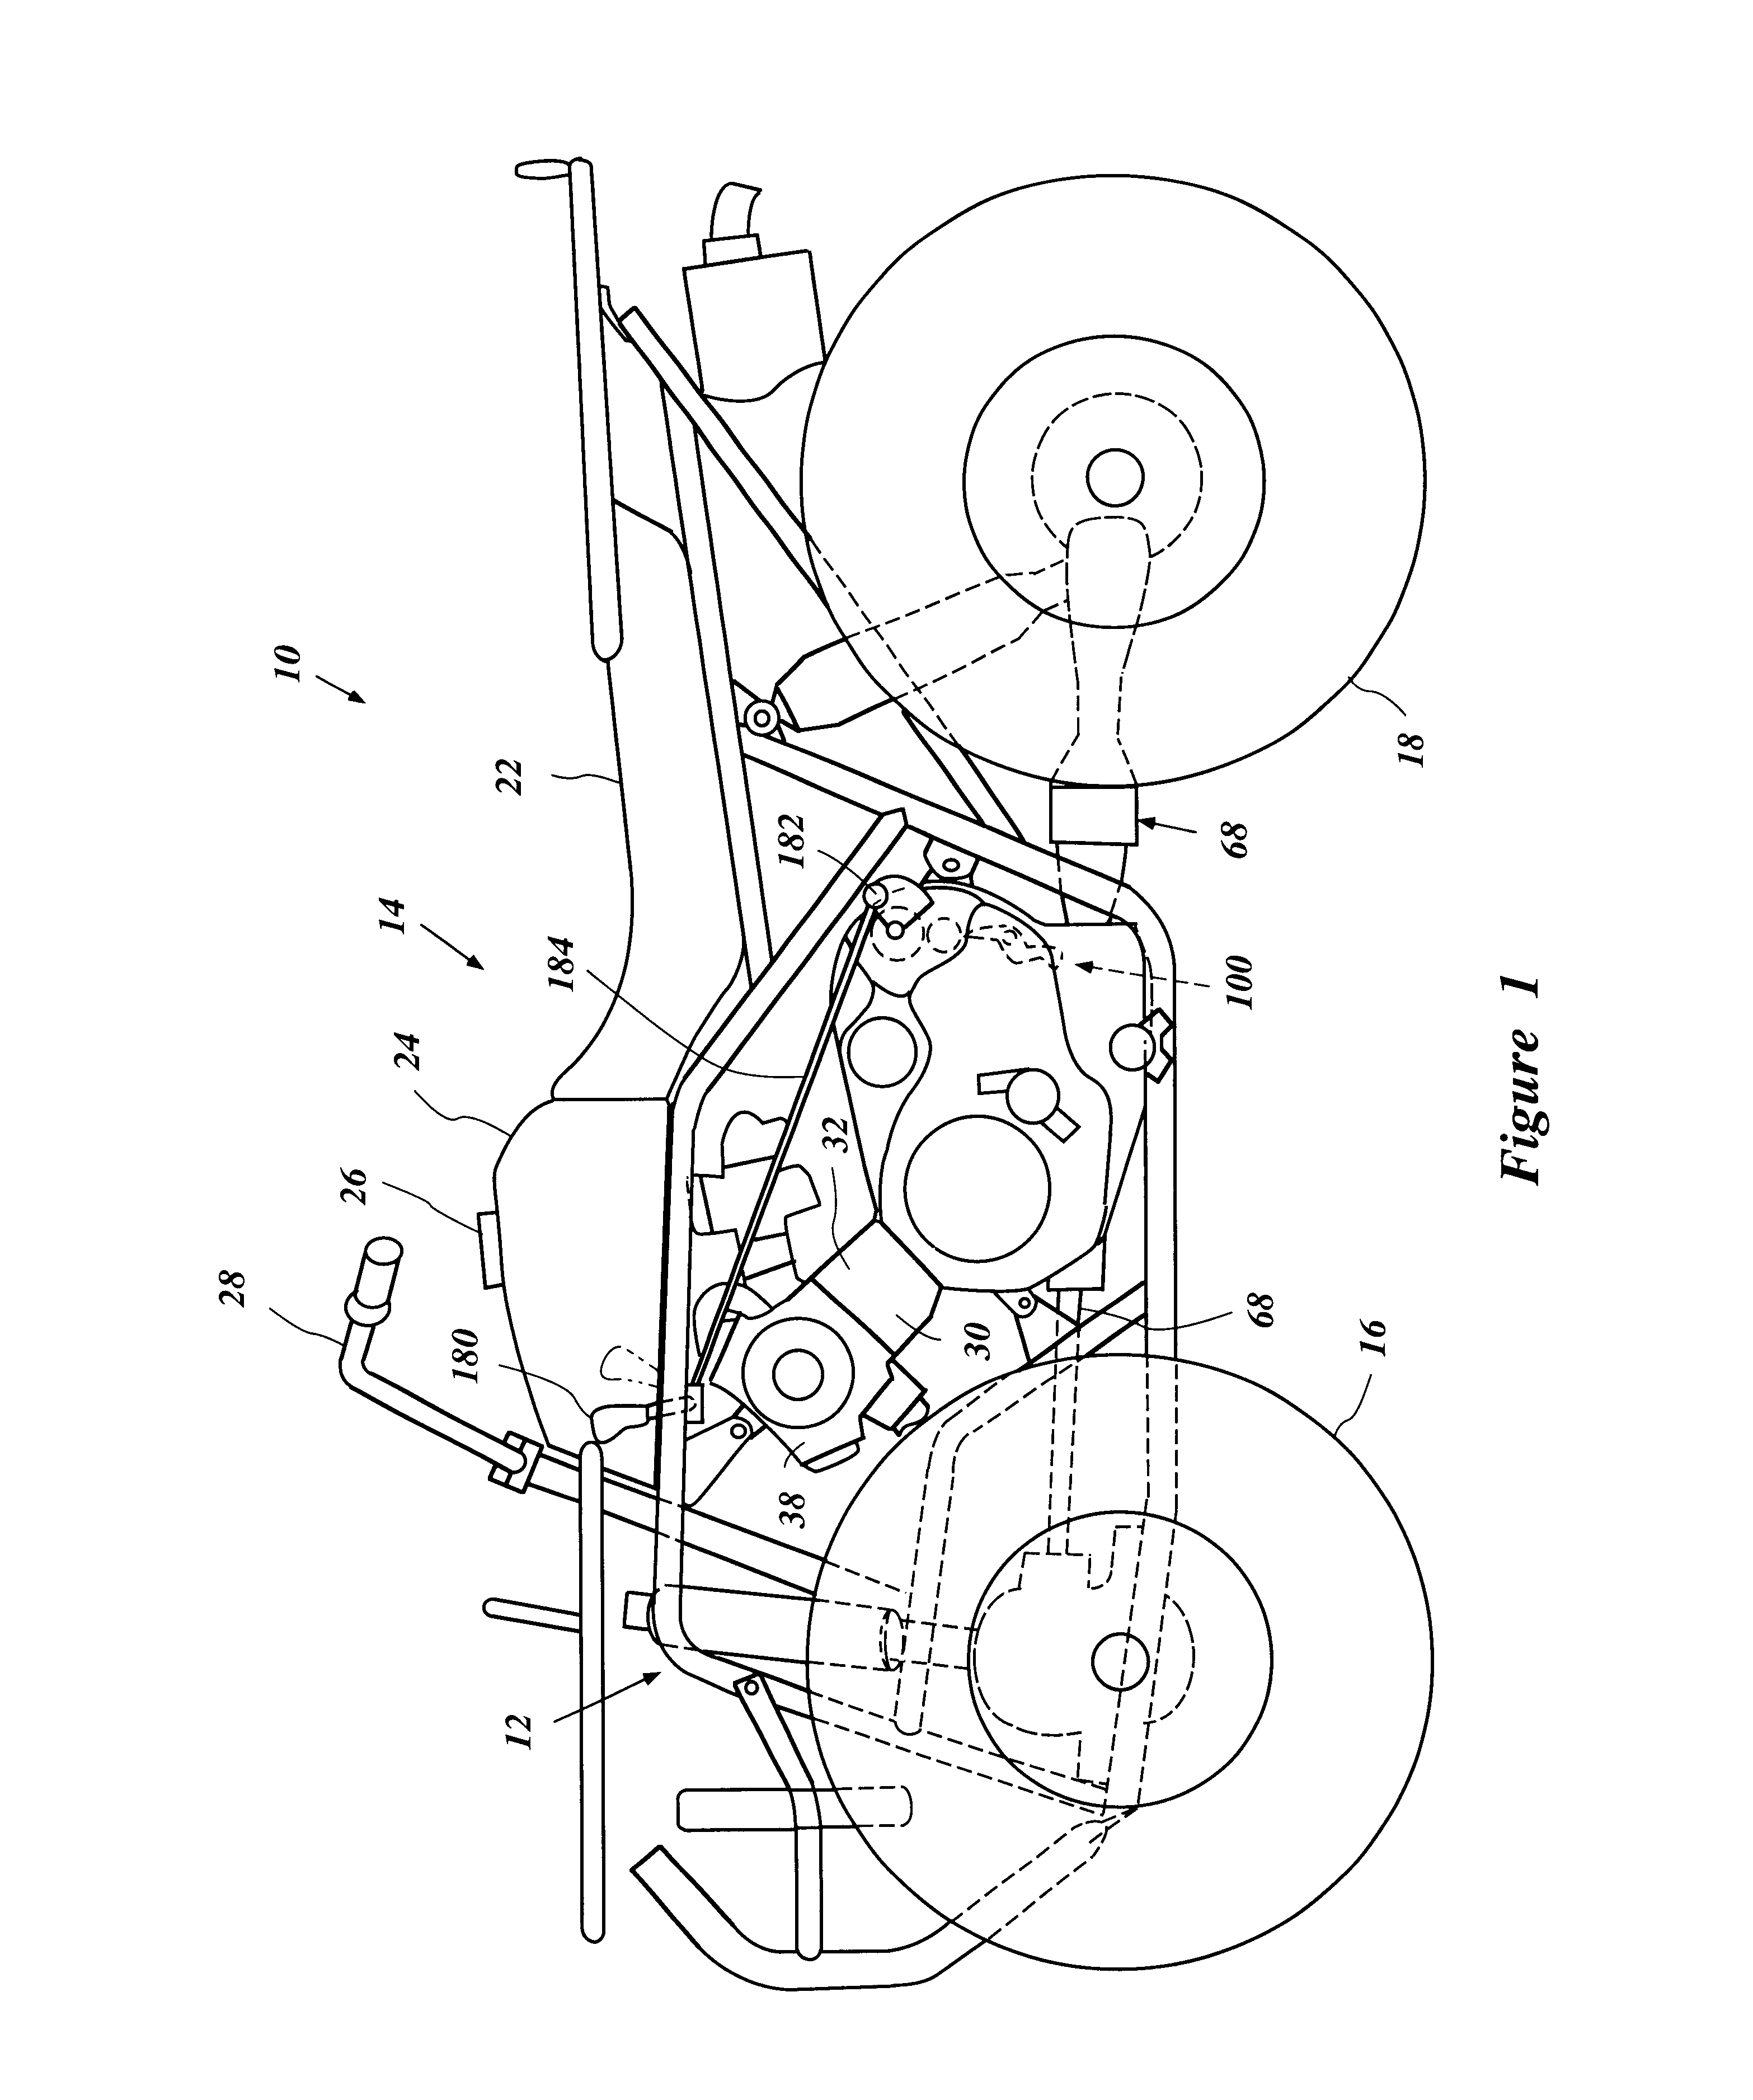 Transmission lock for all-terrain vehicle